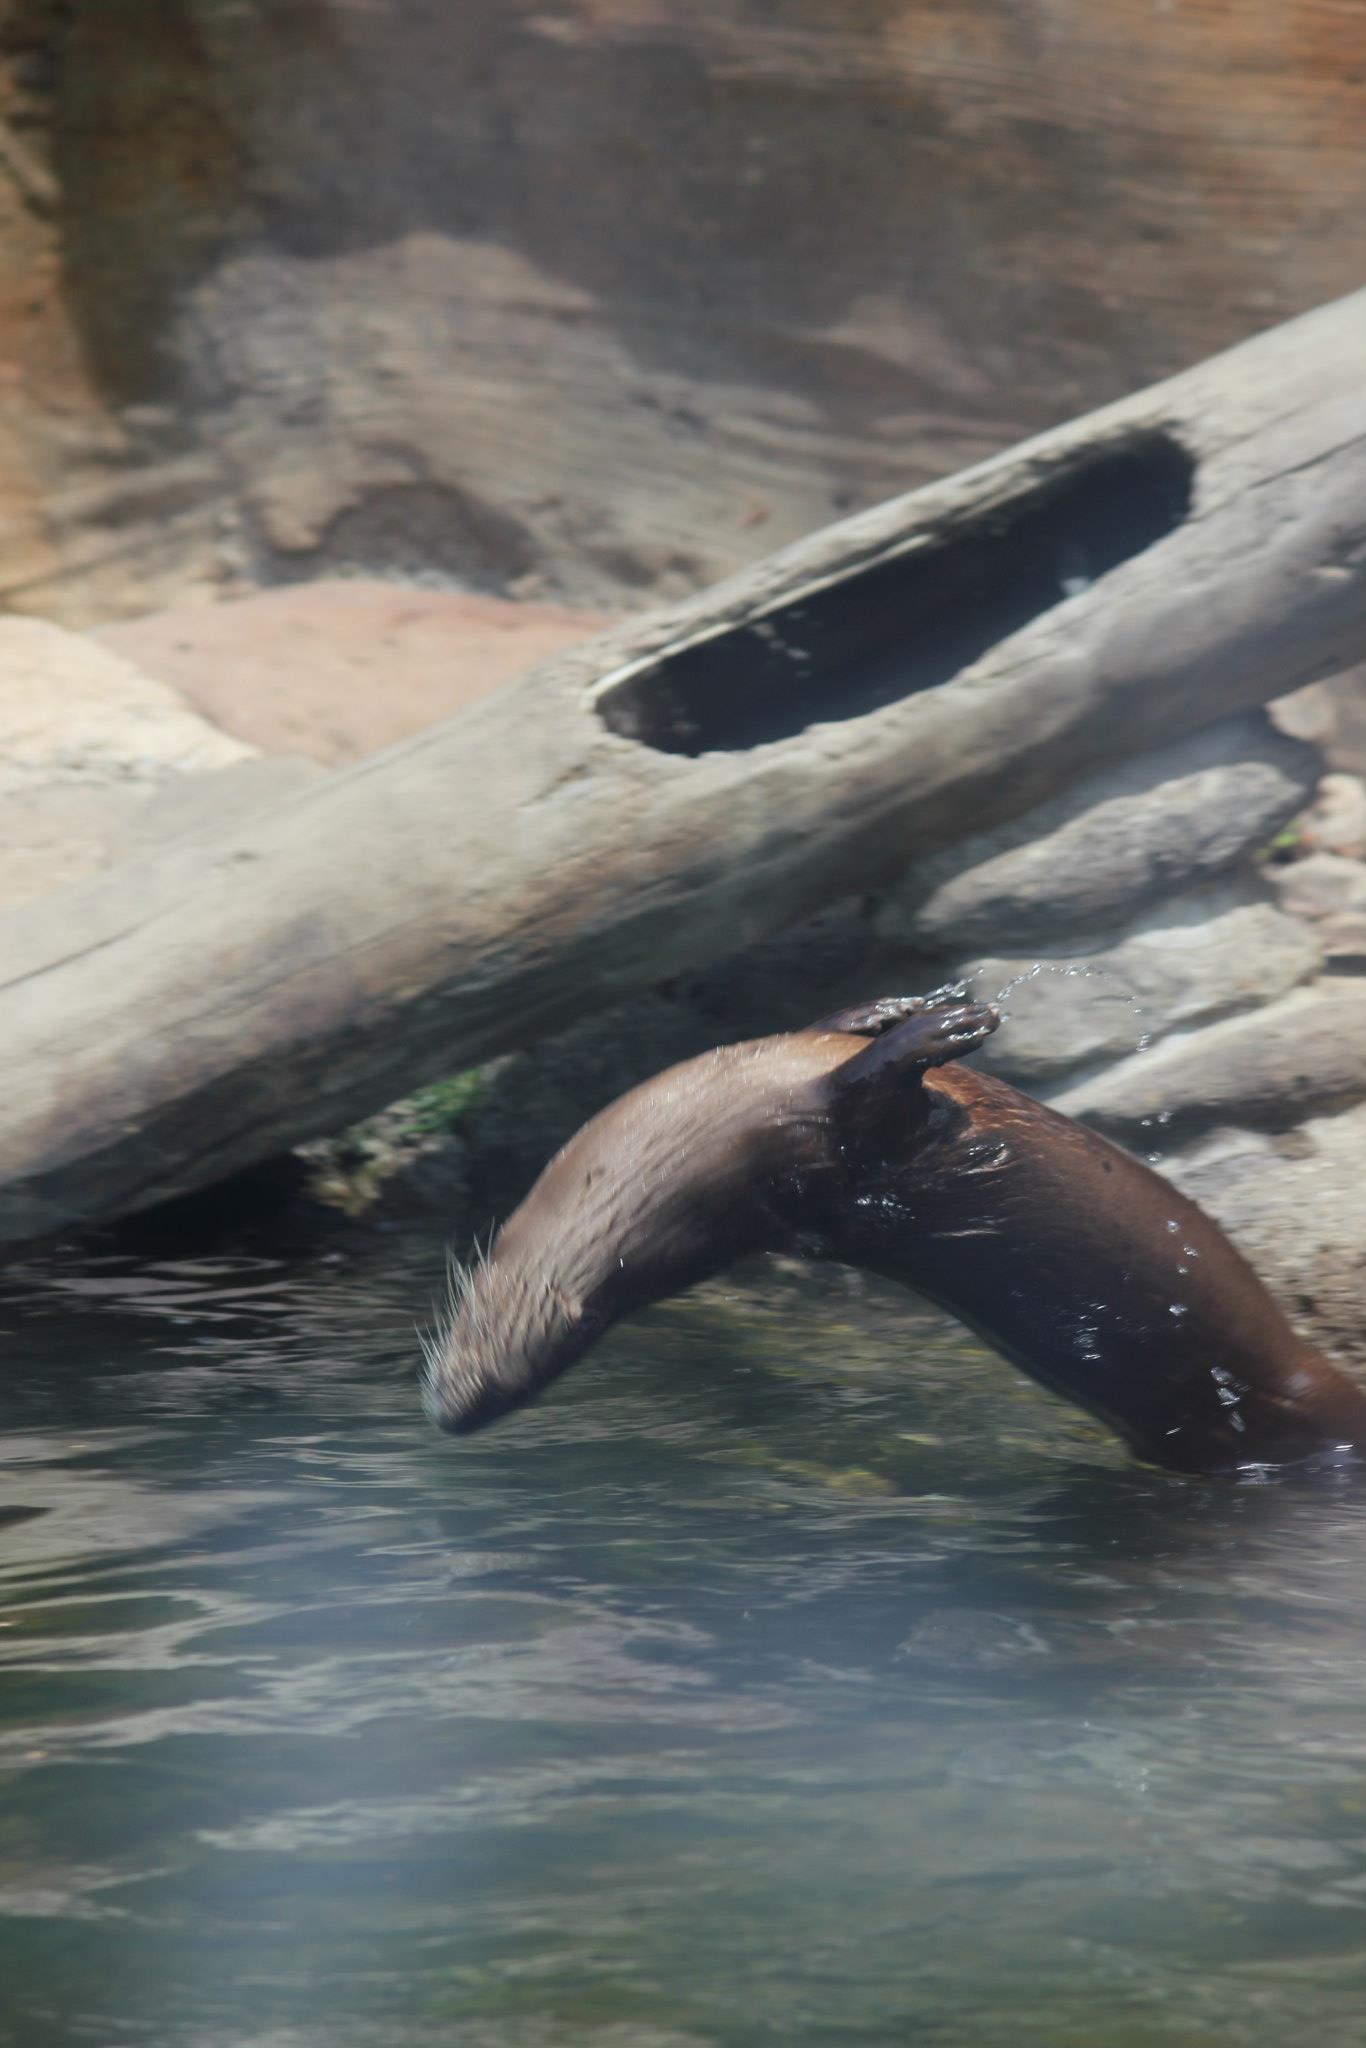 Otters Doing Backflips - Roundup with Photo and Video